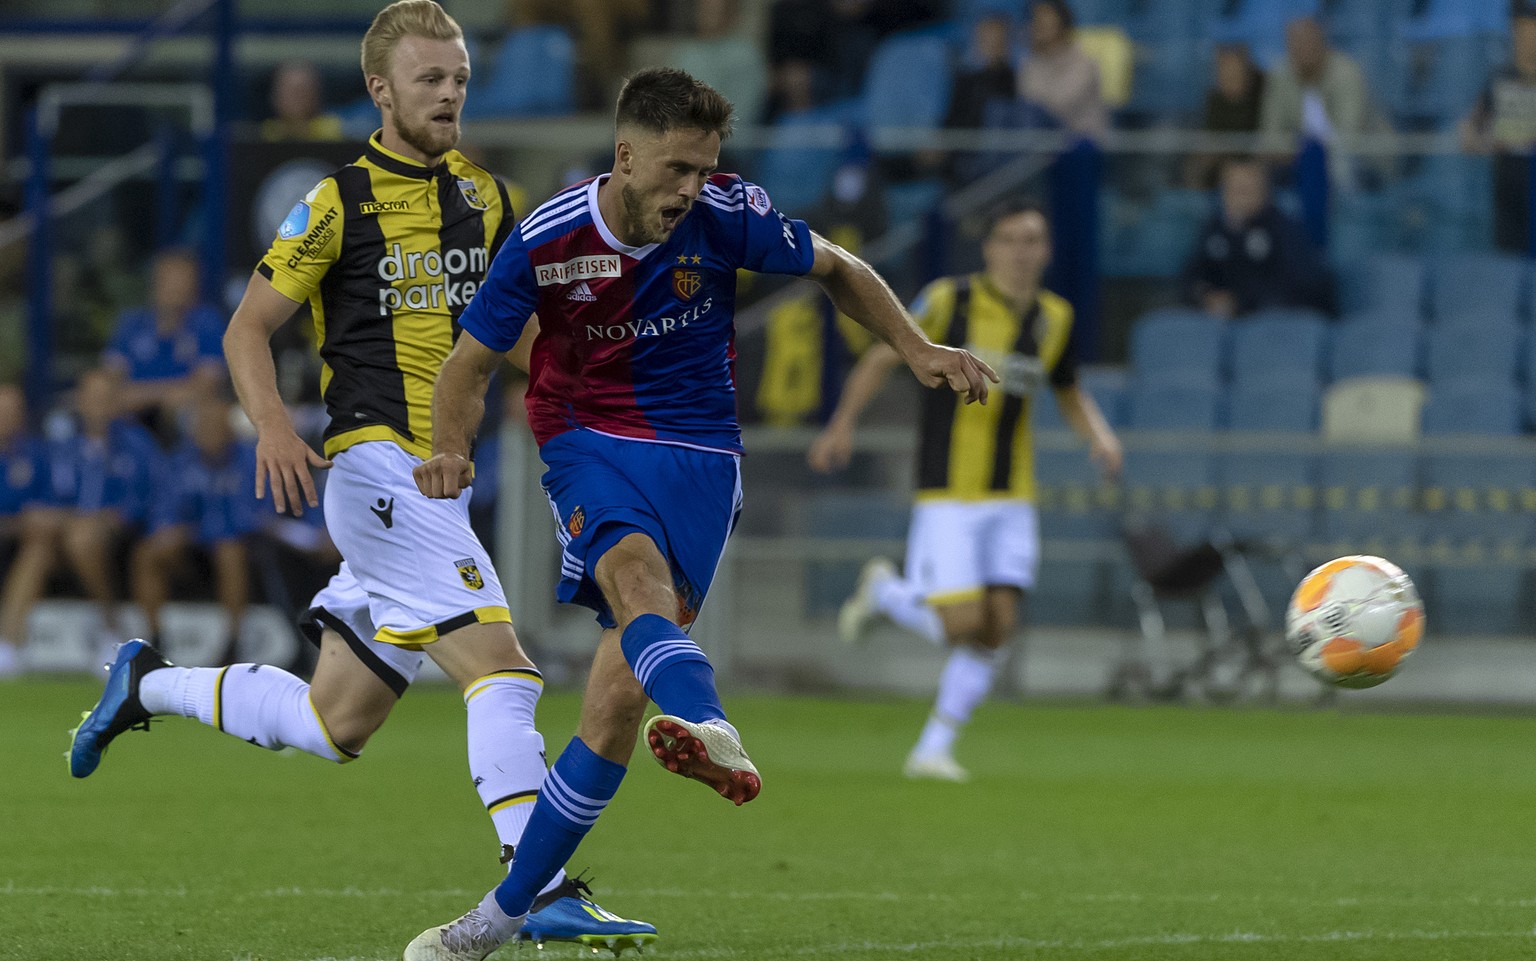 Basel&#039;s Ricky van Wolfswinkel scores during the UEFA Europa League third qualifying round first leg match between Netherland&#039;s Vitesse and Switzerland&#039;s FC Basel 1893 in the GelreDome s ...